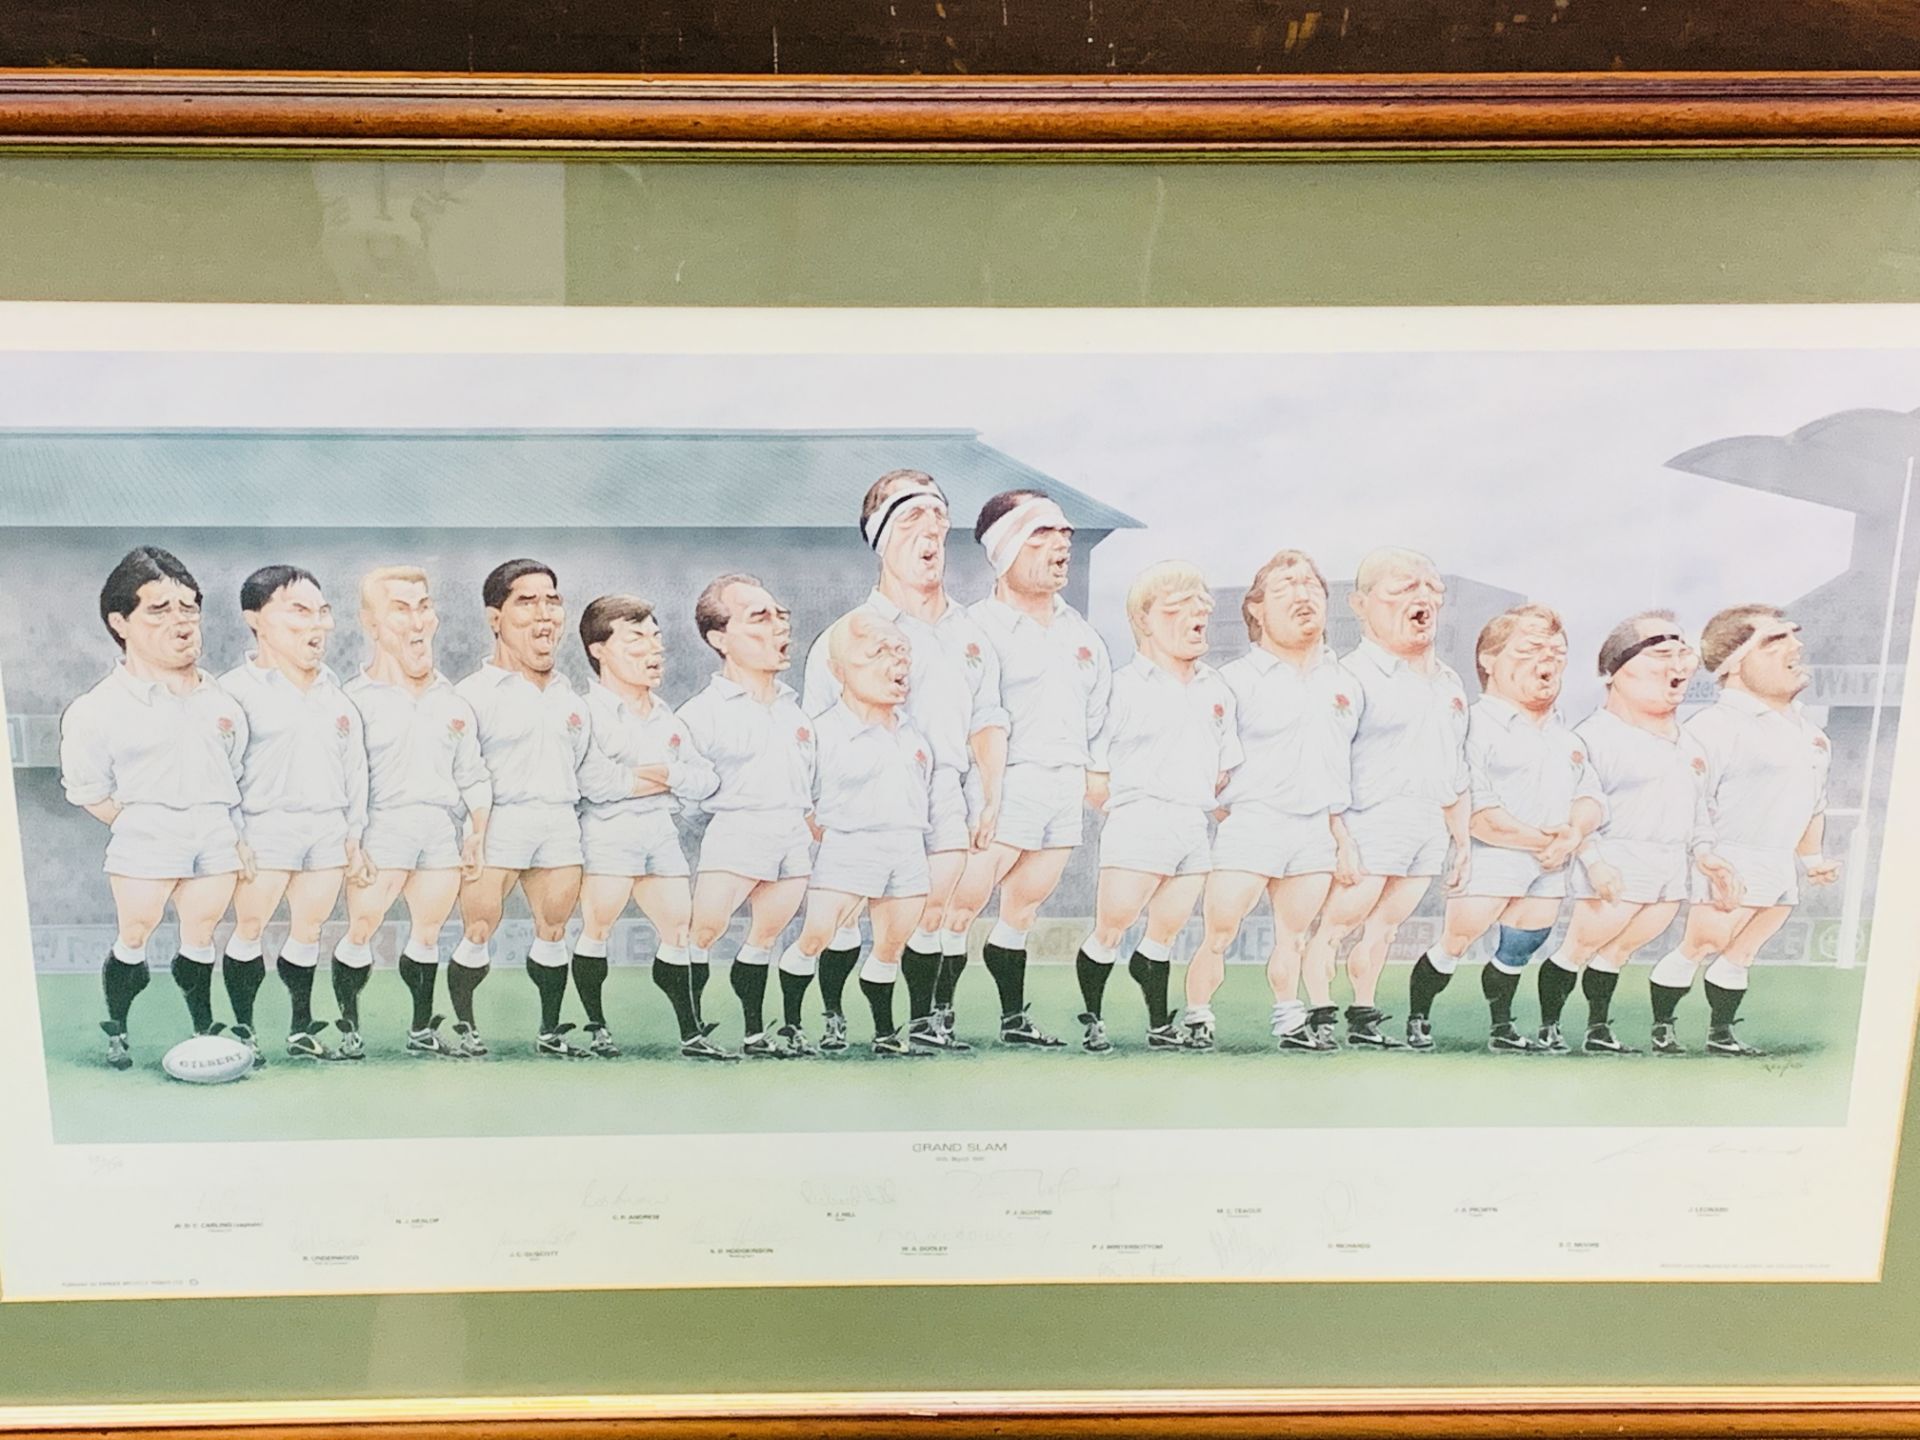 Framed and glazed limited edition print 396/500 of England Rugby Union team, "Grand Slam" 16-03-91